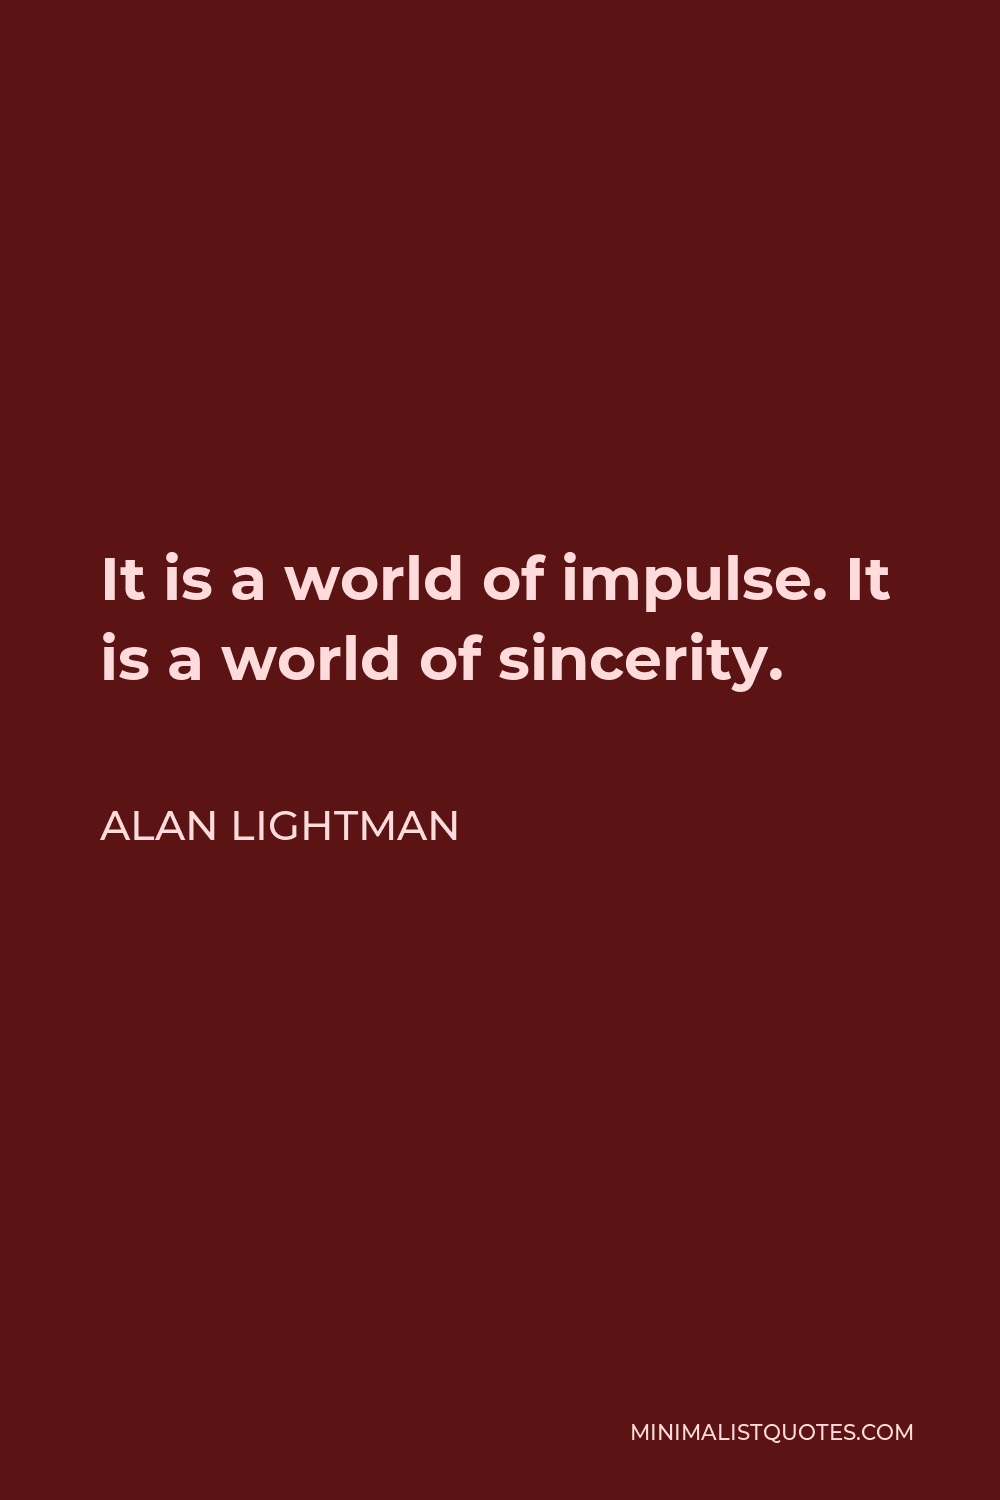 Alan Lightman Quote - It is a world of impulse. It is a world of sincerity.